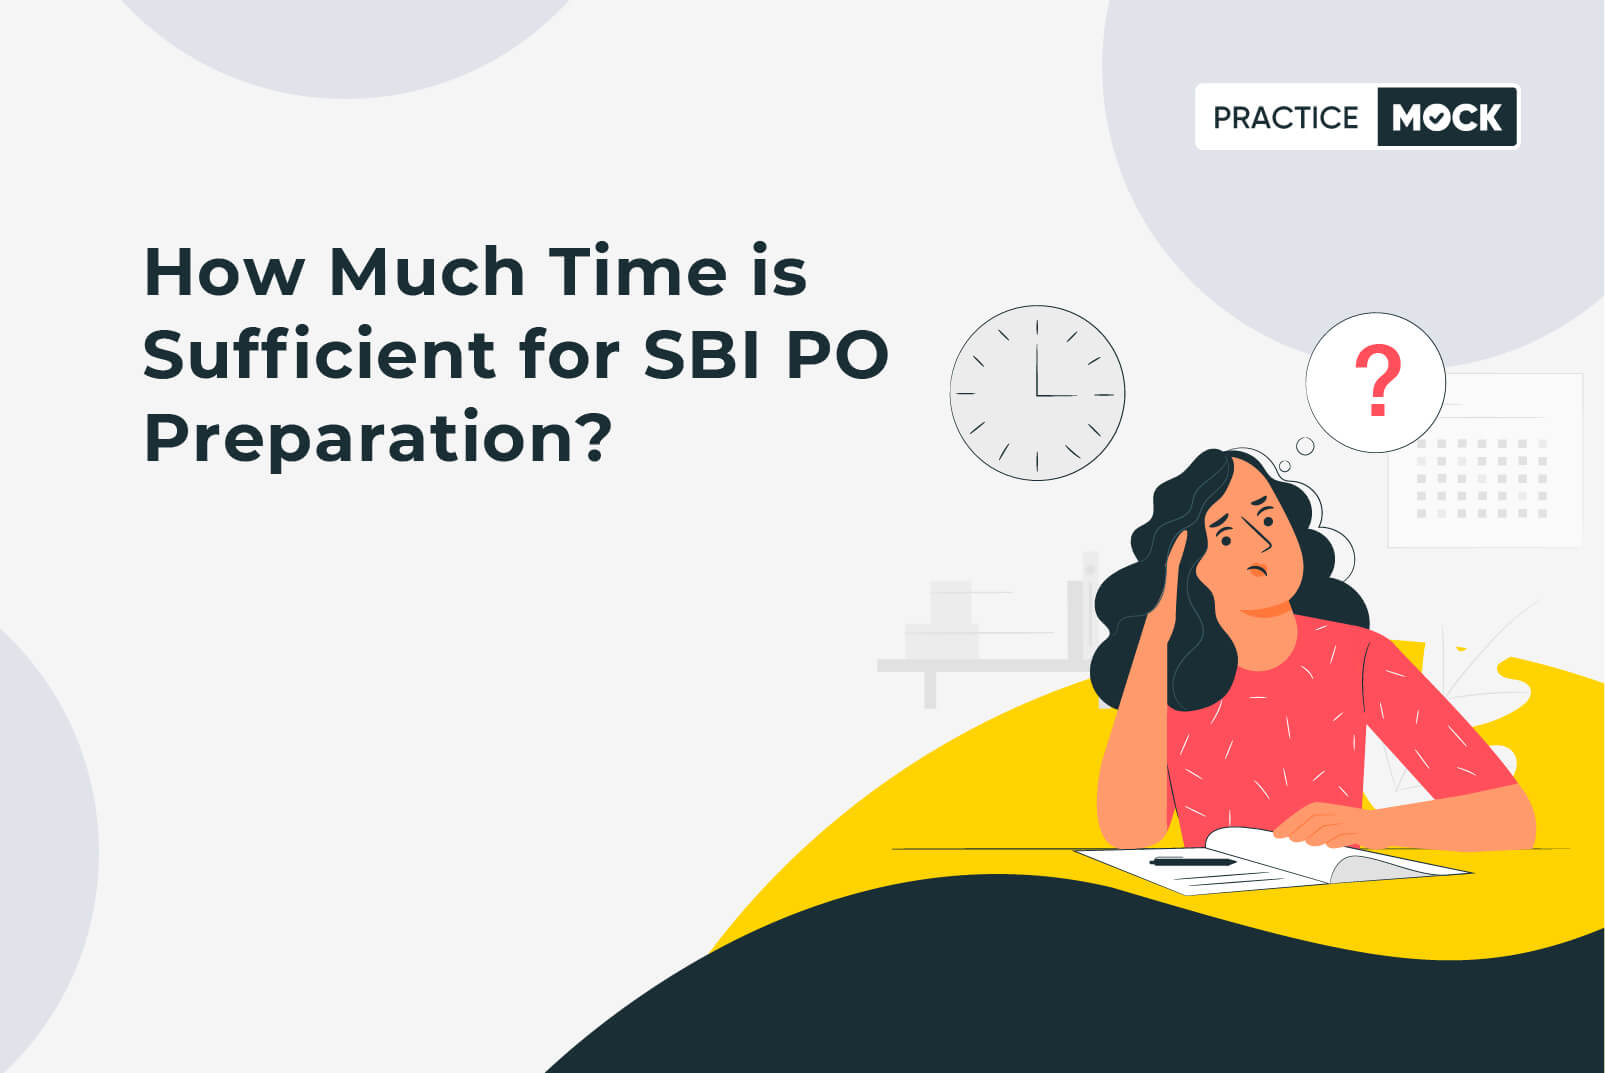 How much time is sufficient for SBI PO preparation?